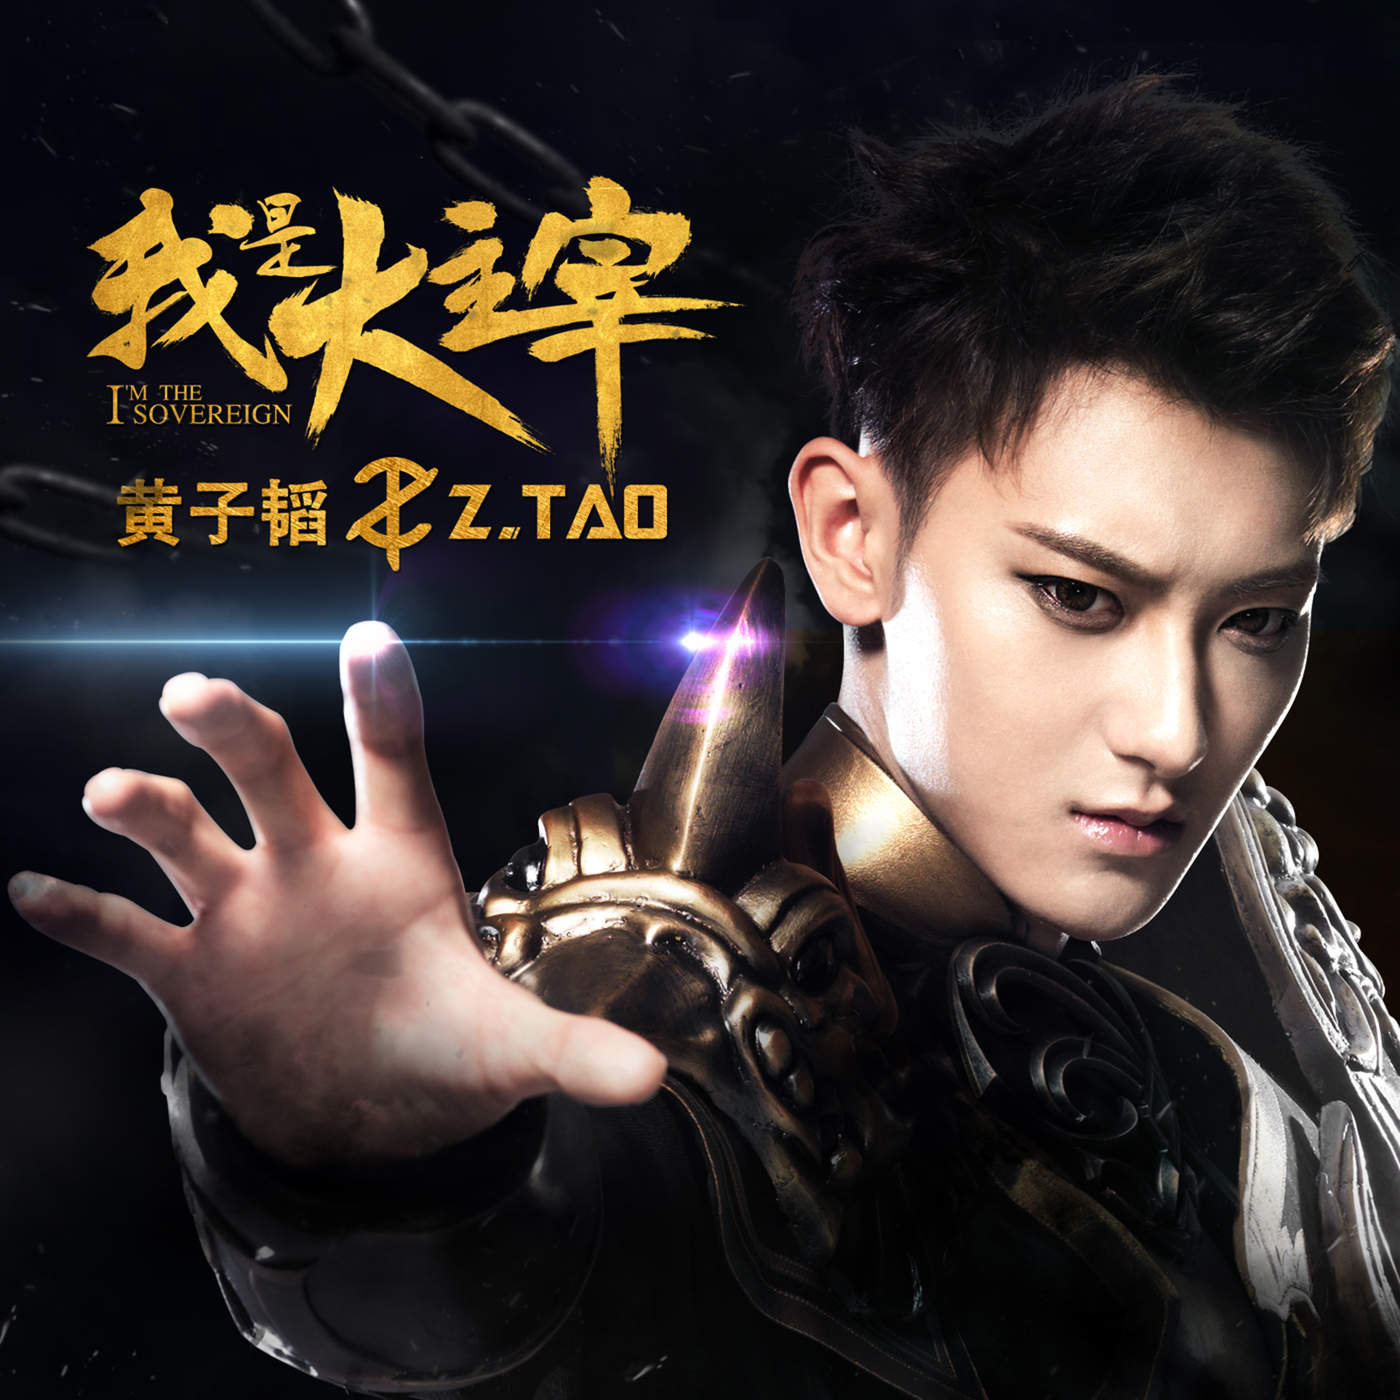 Z.Tao – I’m the Sovereign (Chinese) – Single